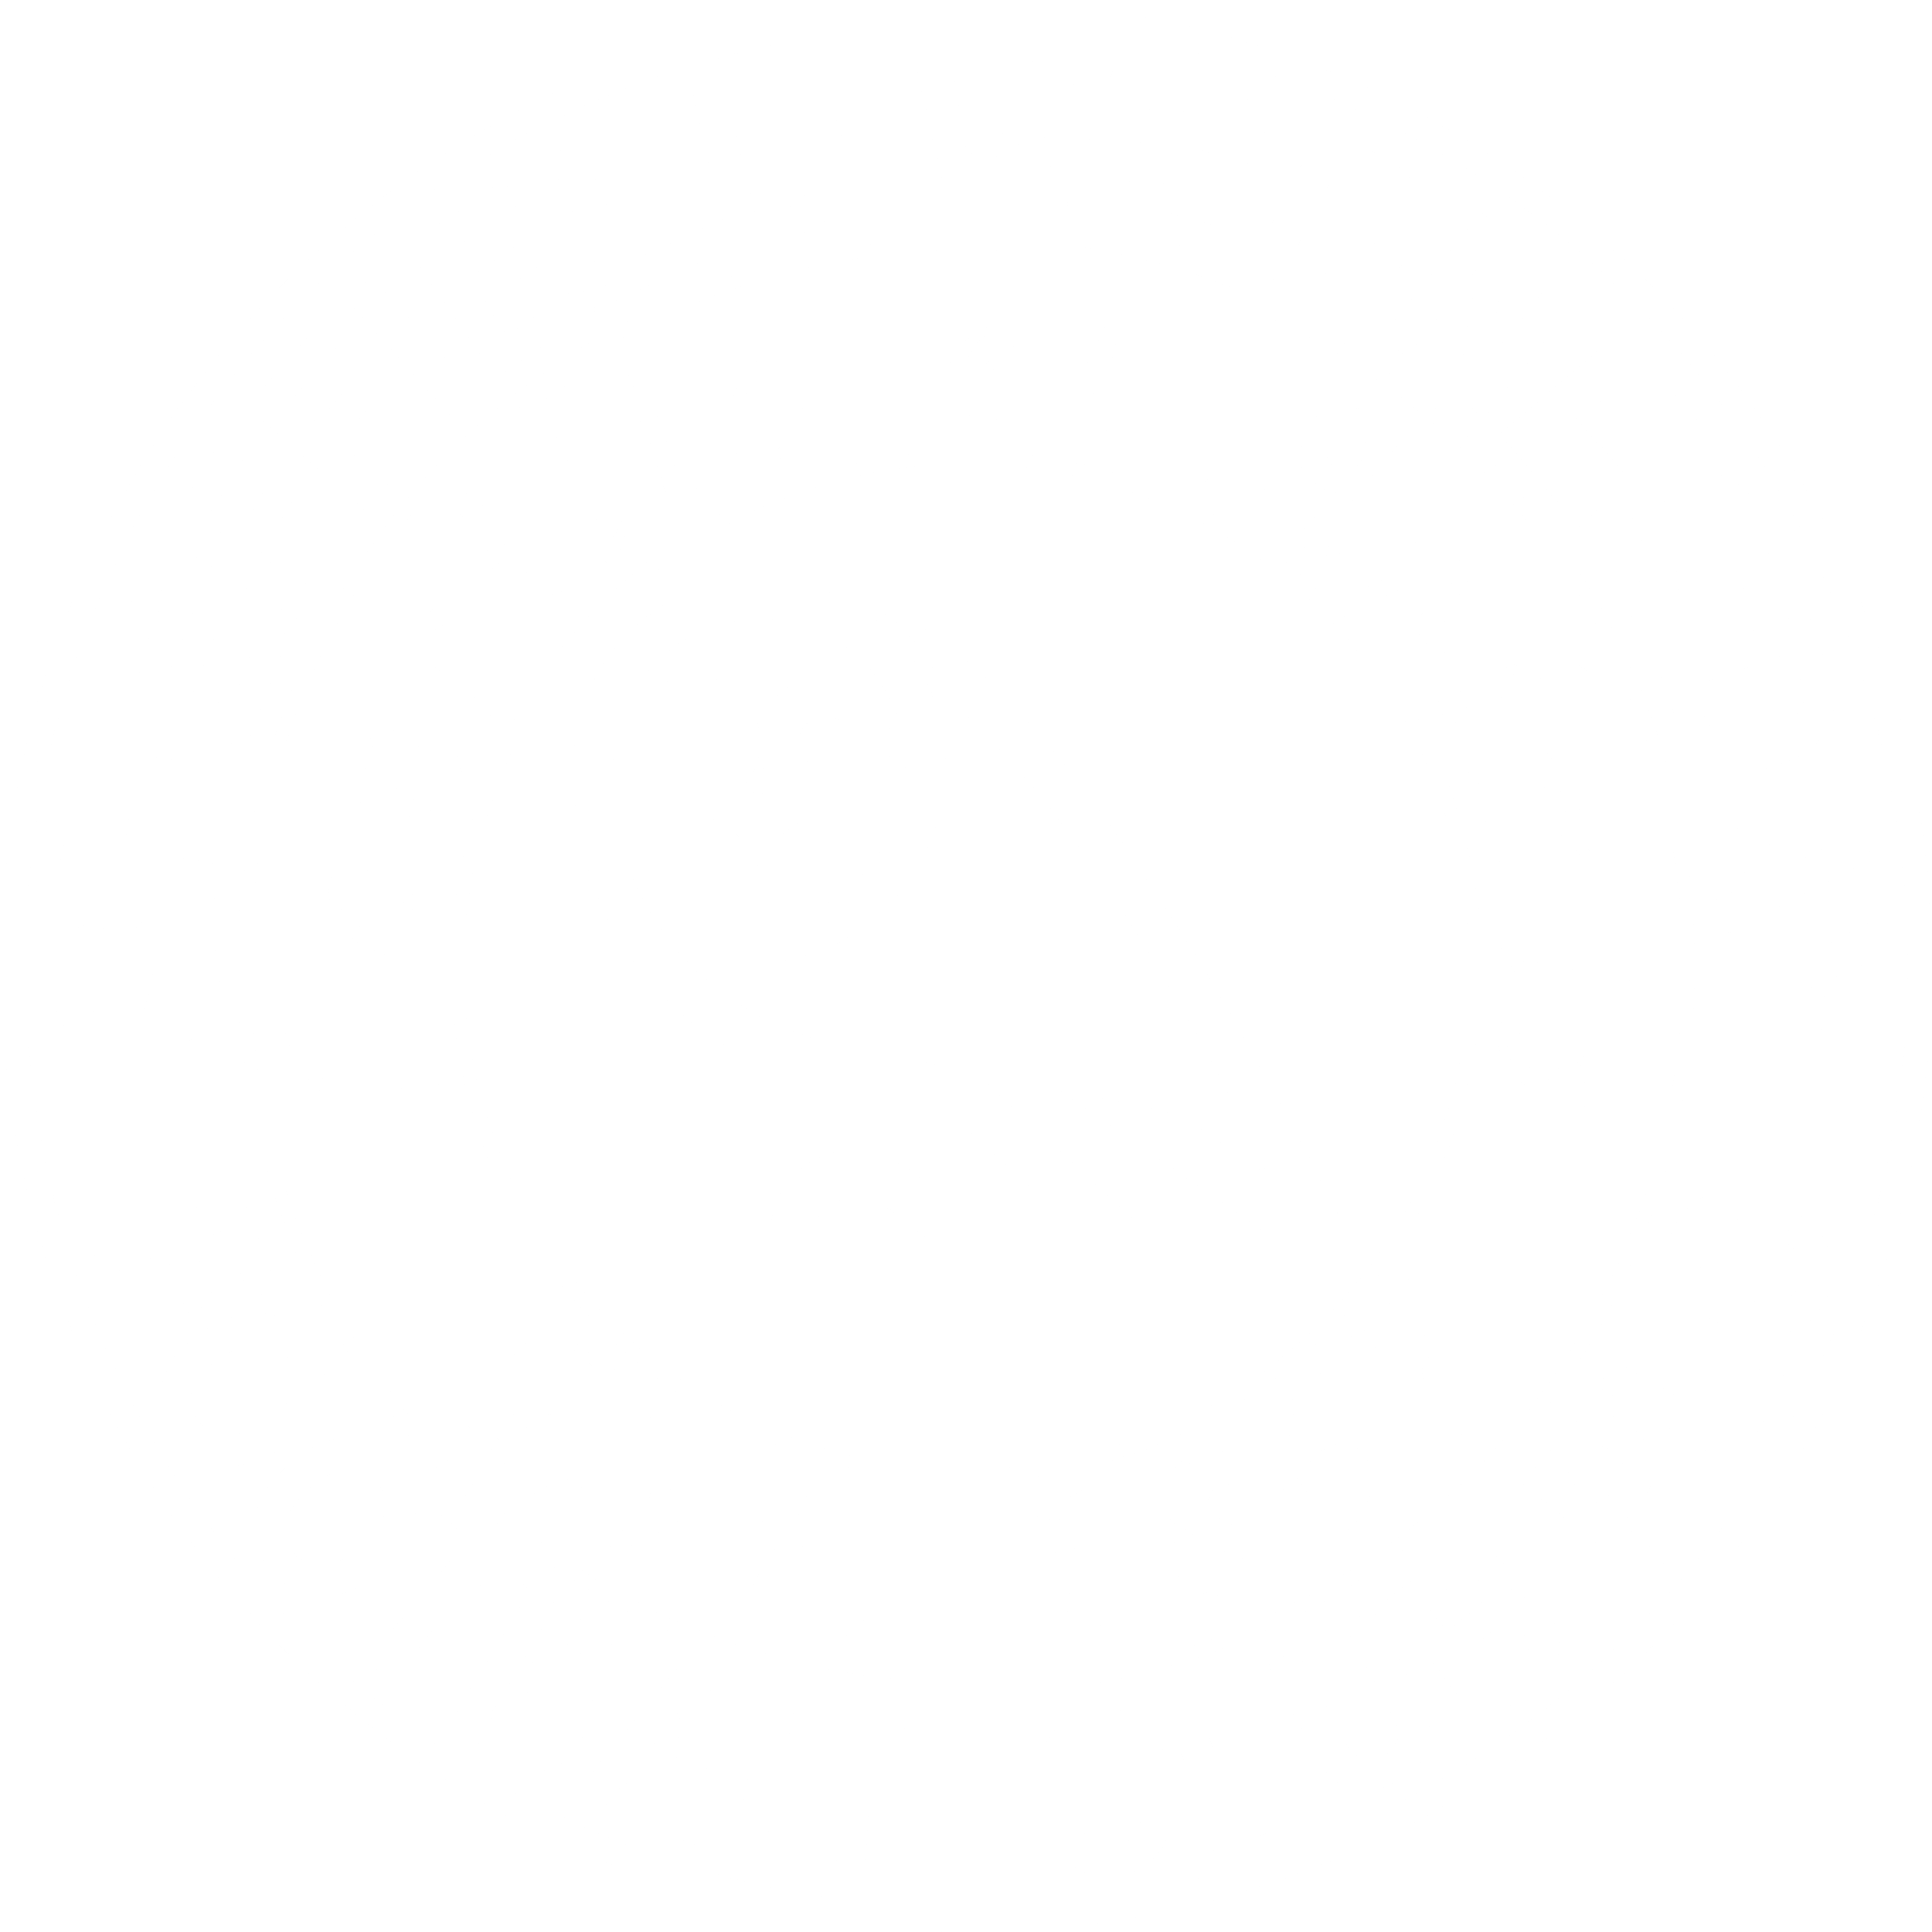 Download Sheffield Wednesday Fc Logo Black And White Plain White Square Background Png Image With No Background Pngkey Com